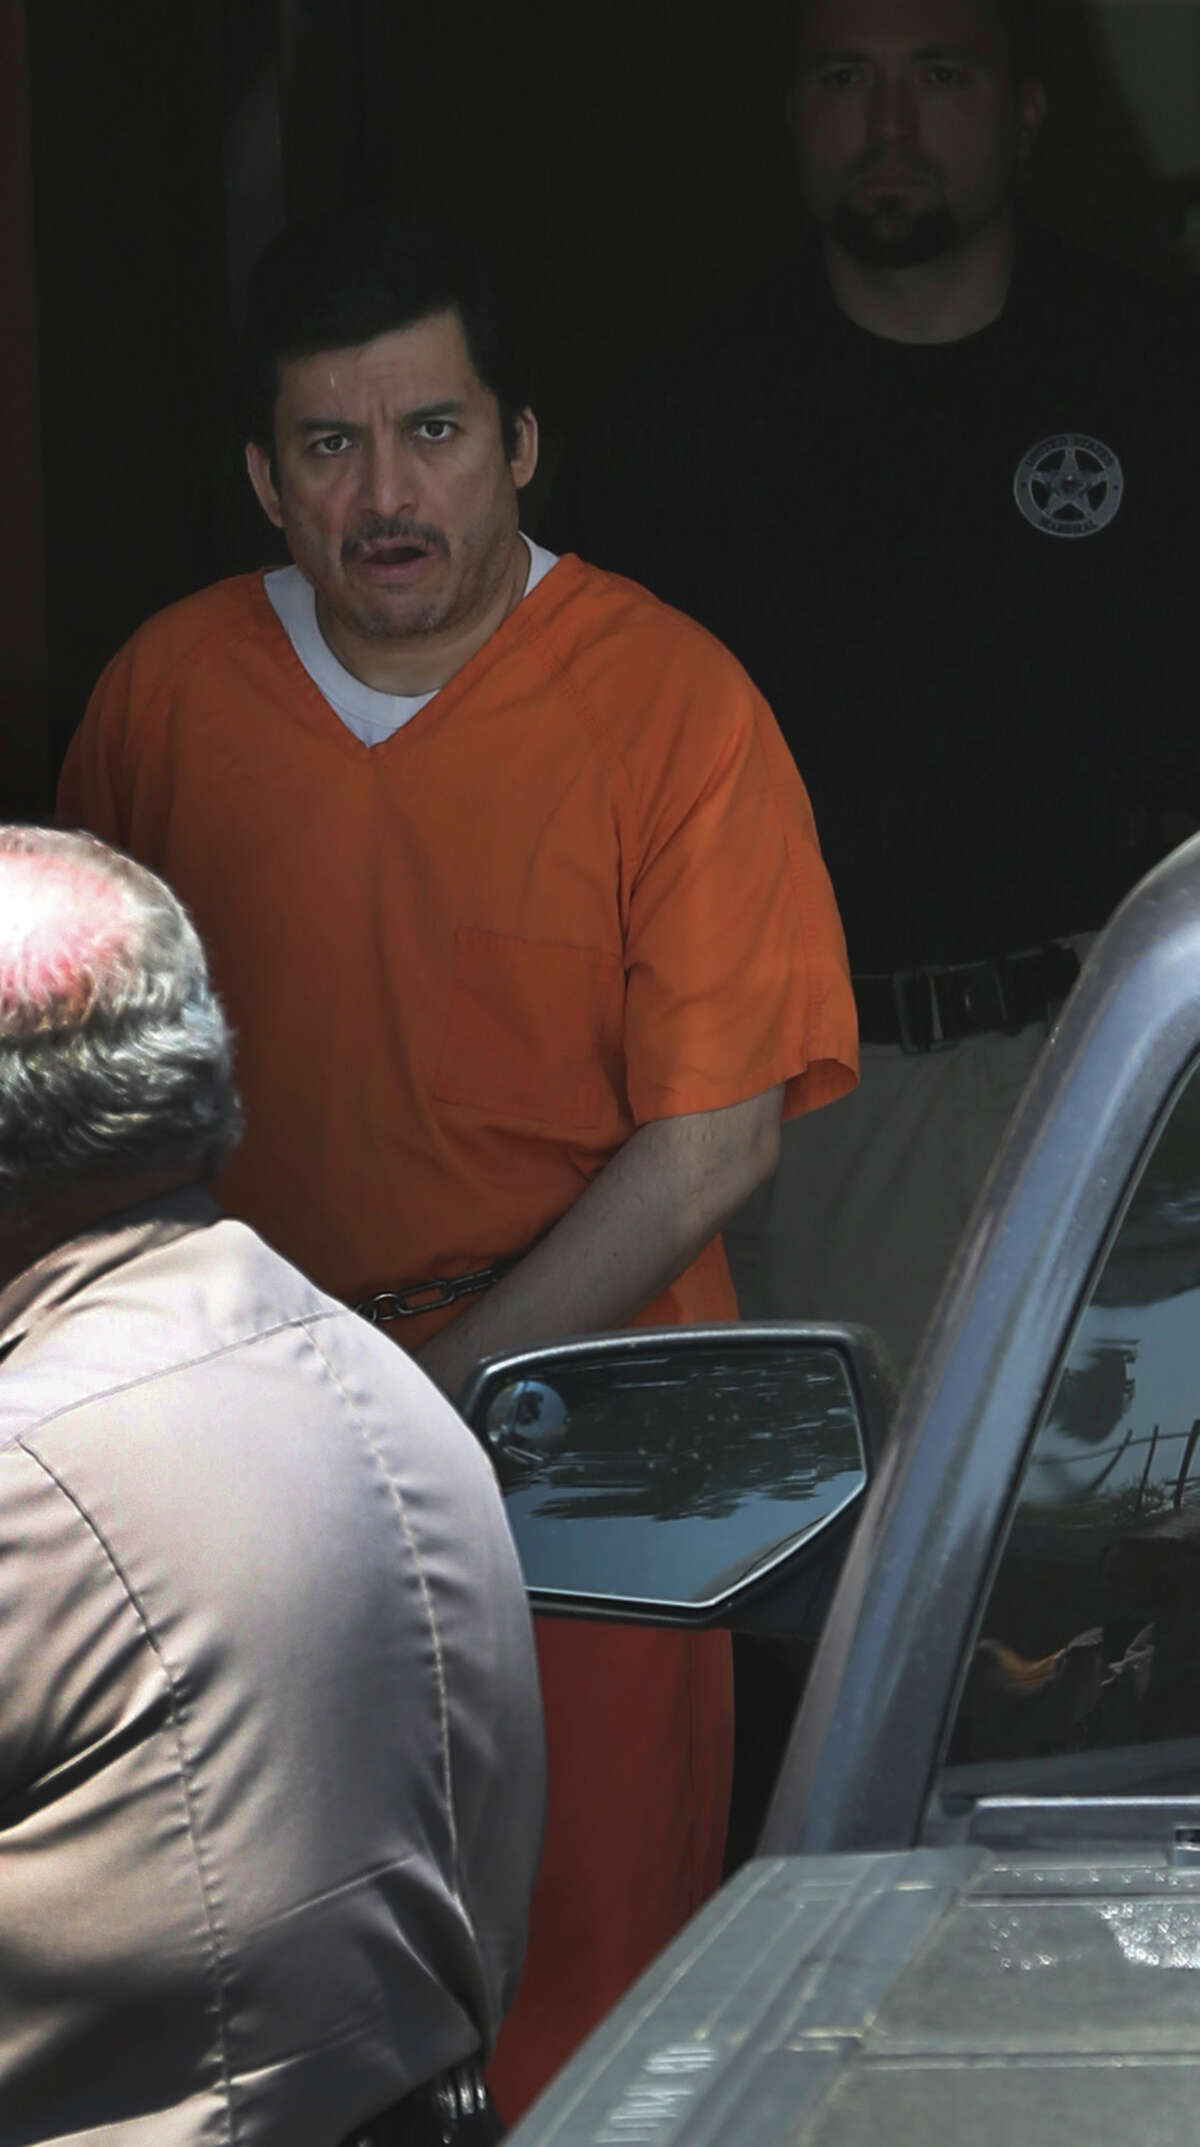 Ezequiel Rodriguez, (center, wearing orange jumpsuit) a reported associate of the Zetas, is escorted out of the back of the John H. Wood Federal Courthouse Tuesday April 7, 2015 in San Antonio, Texas. Rodriguez allegedly booked music acts for the cartel and was arrested in 2013 on a drug charge after being a fugitive for a while.